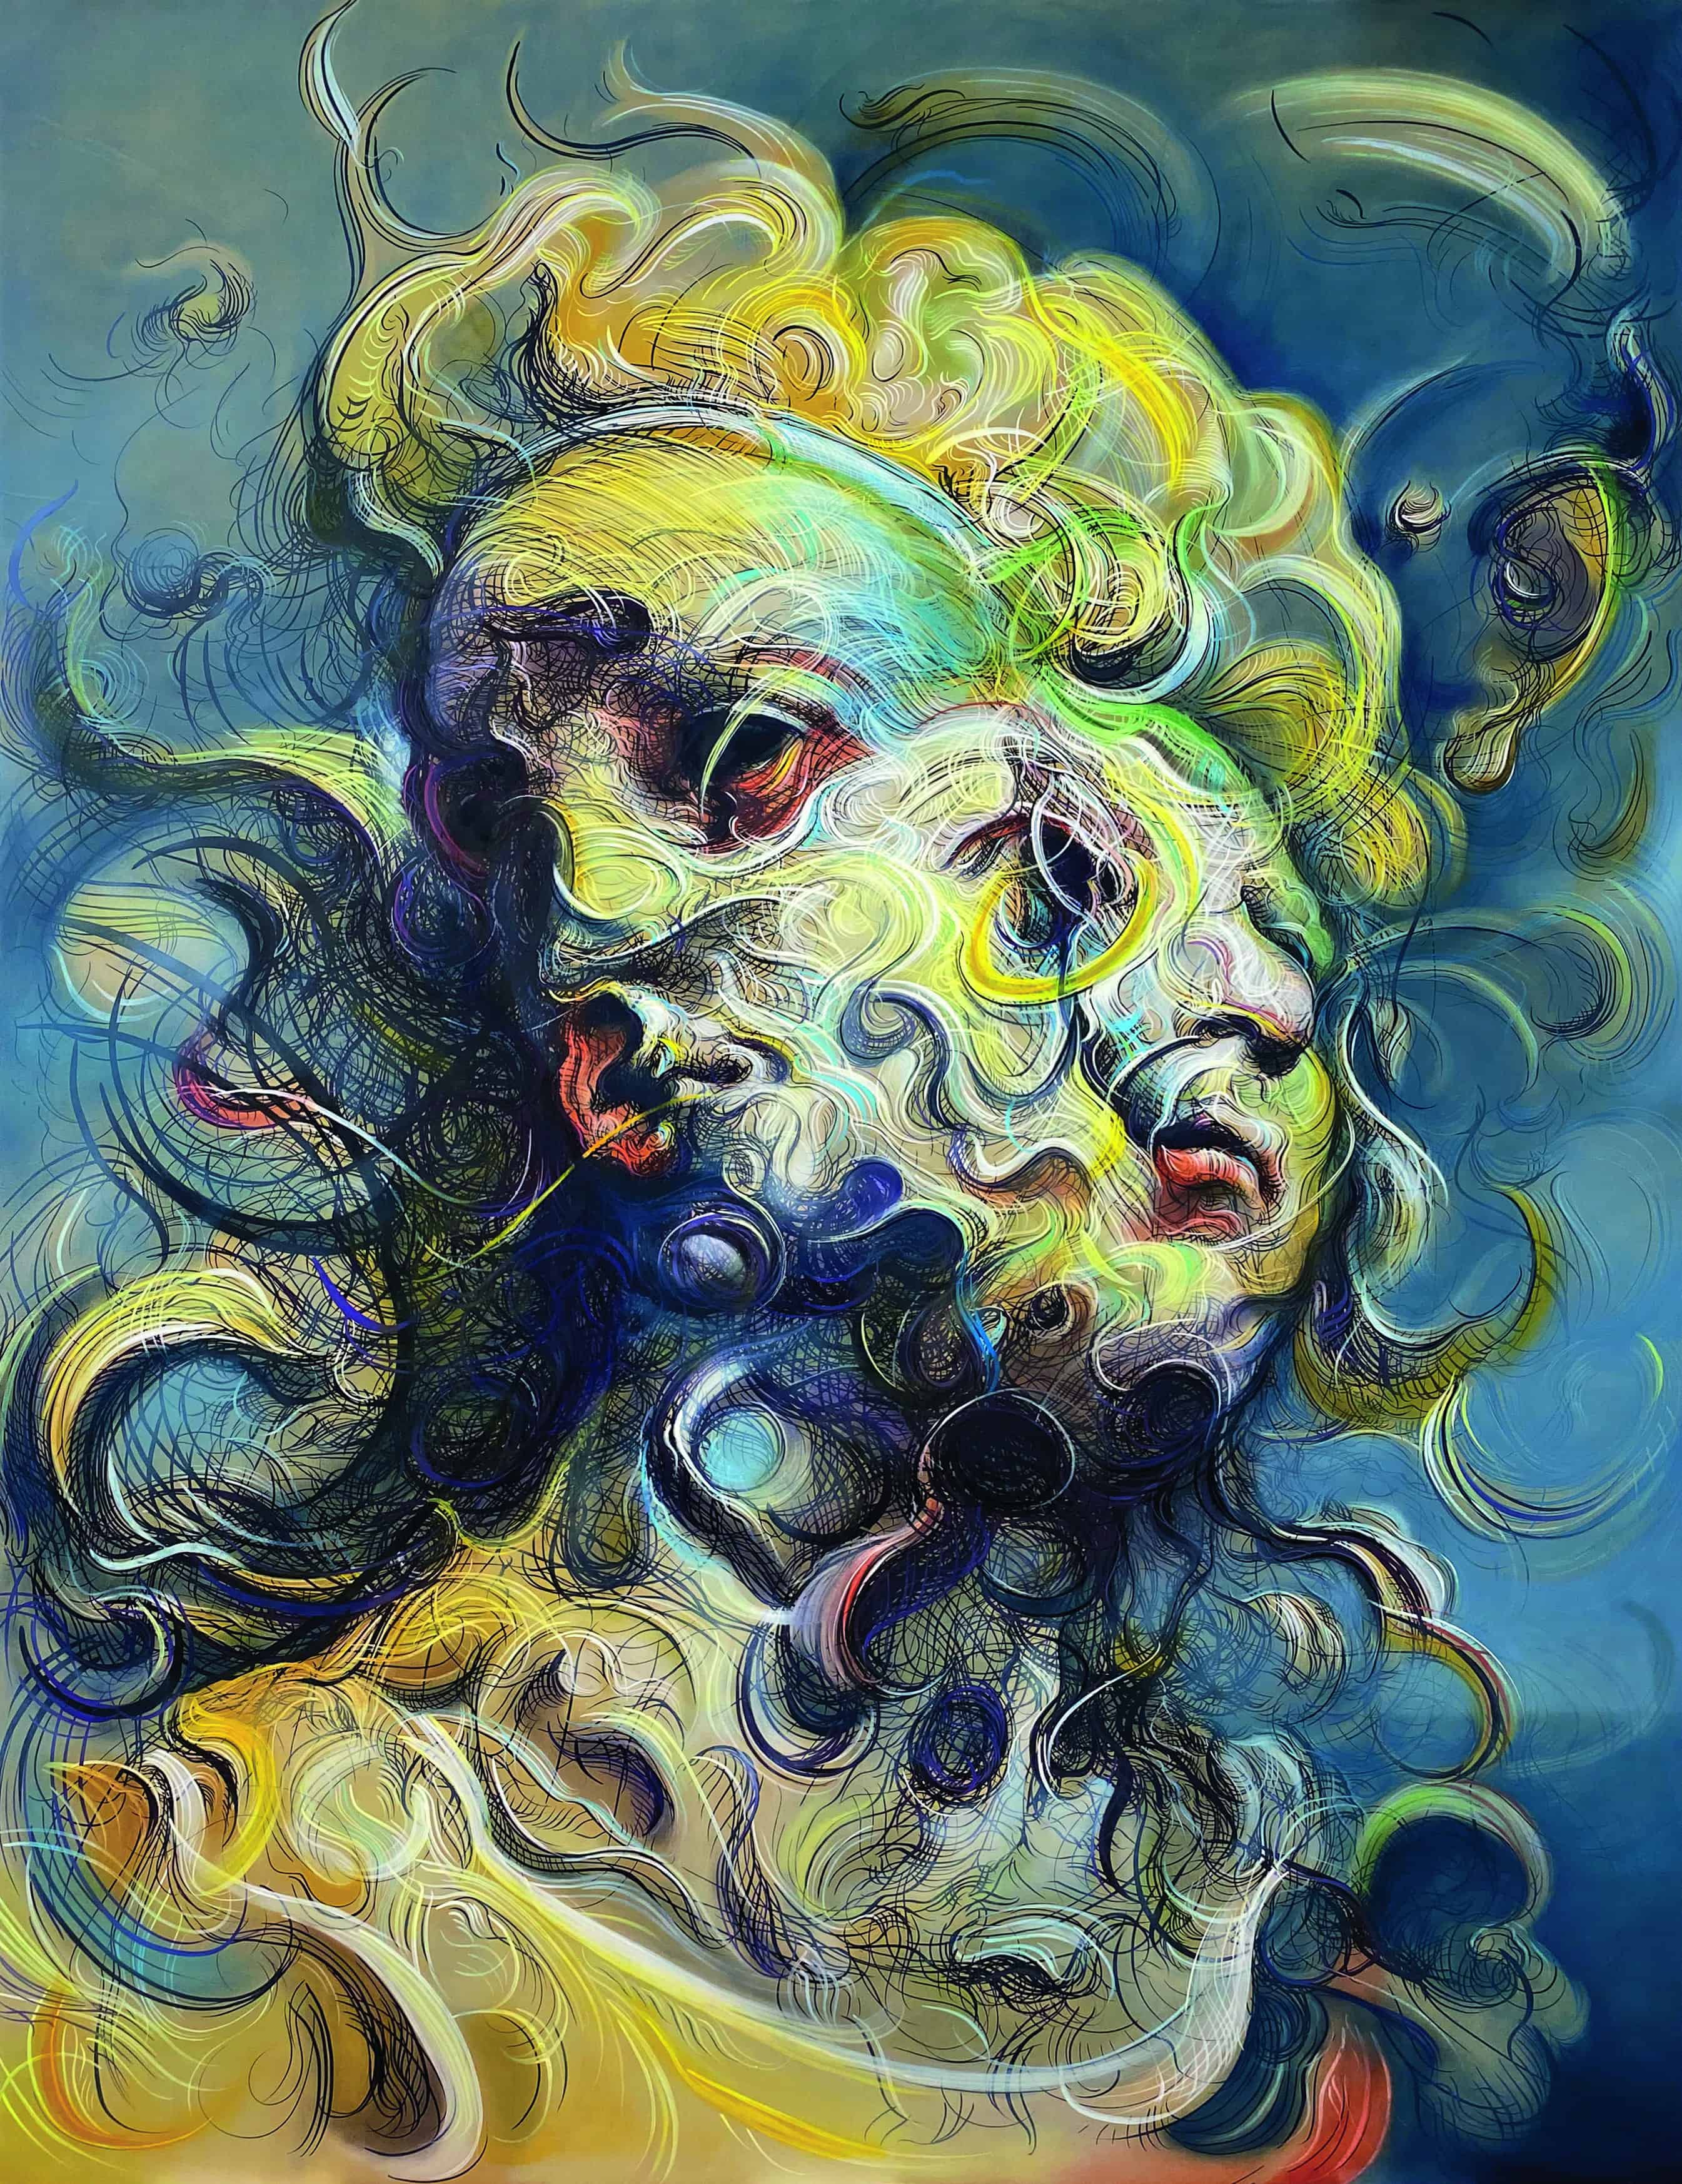 oil and acrylic on canvas, surrealist painting of a woman, showing her face pointed in two directions. curved and wavy line work suggest the forms. the woman has curled yellow hair, white skin and yellow clothes. the background is blue.